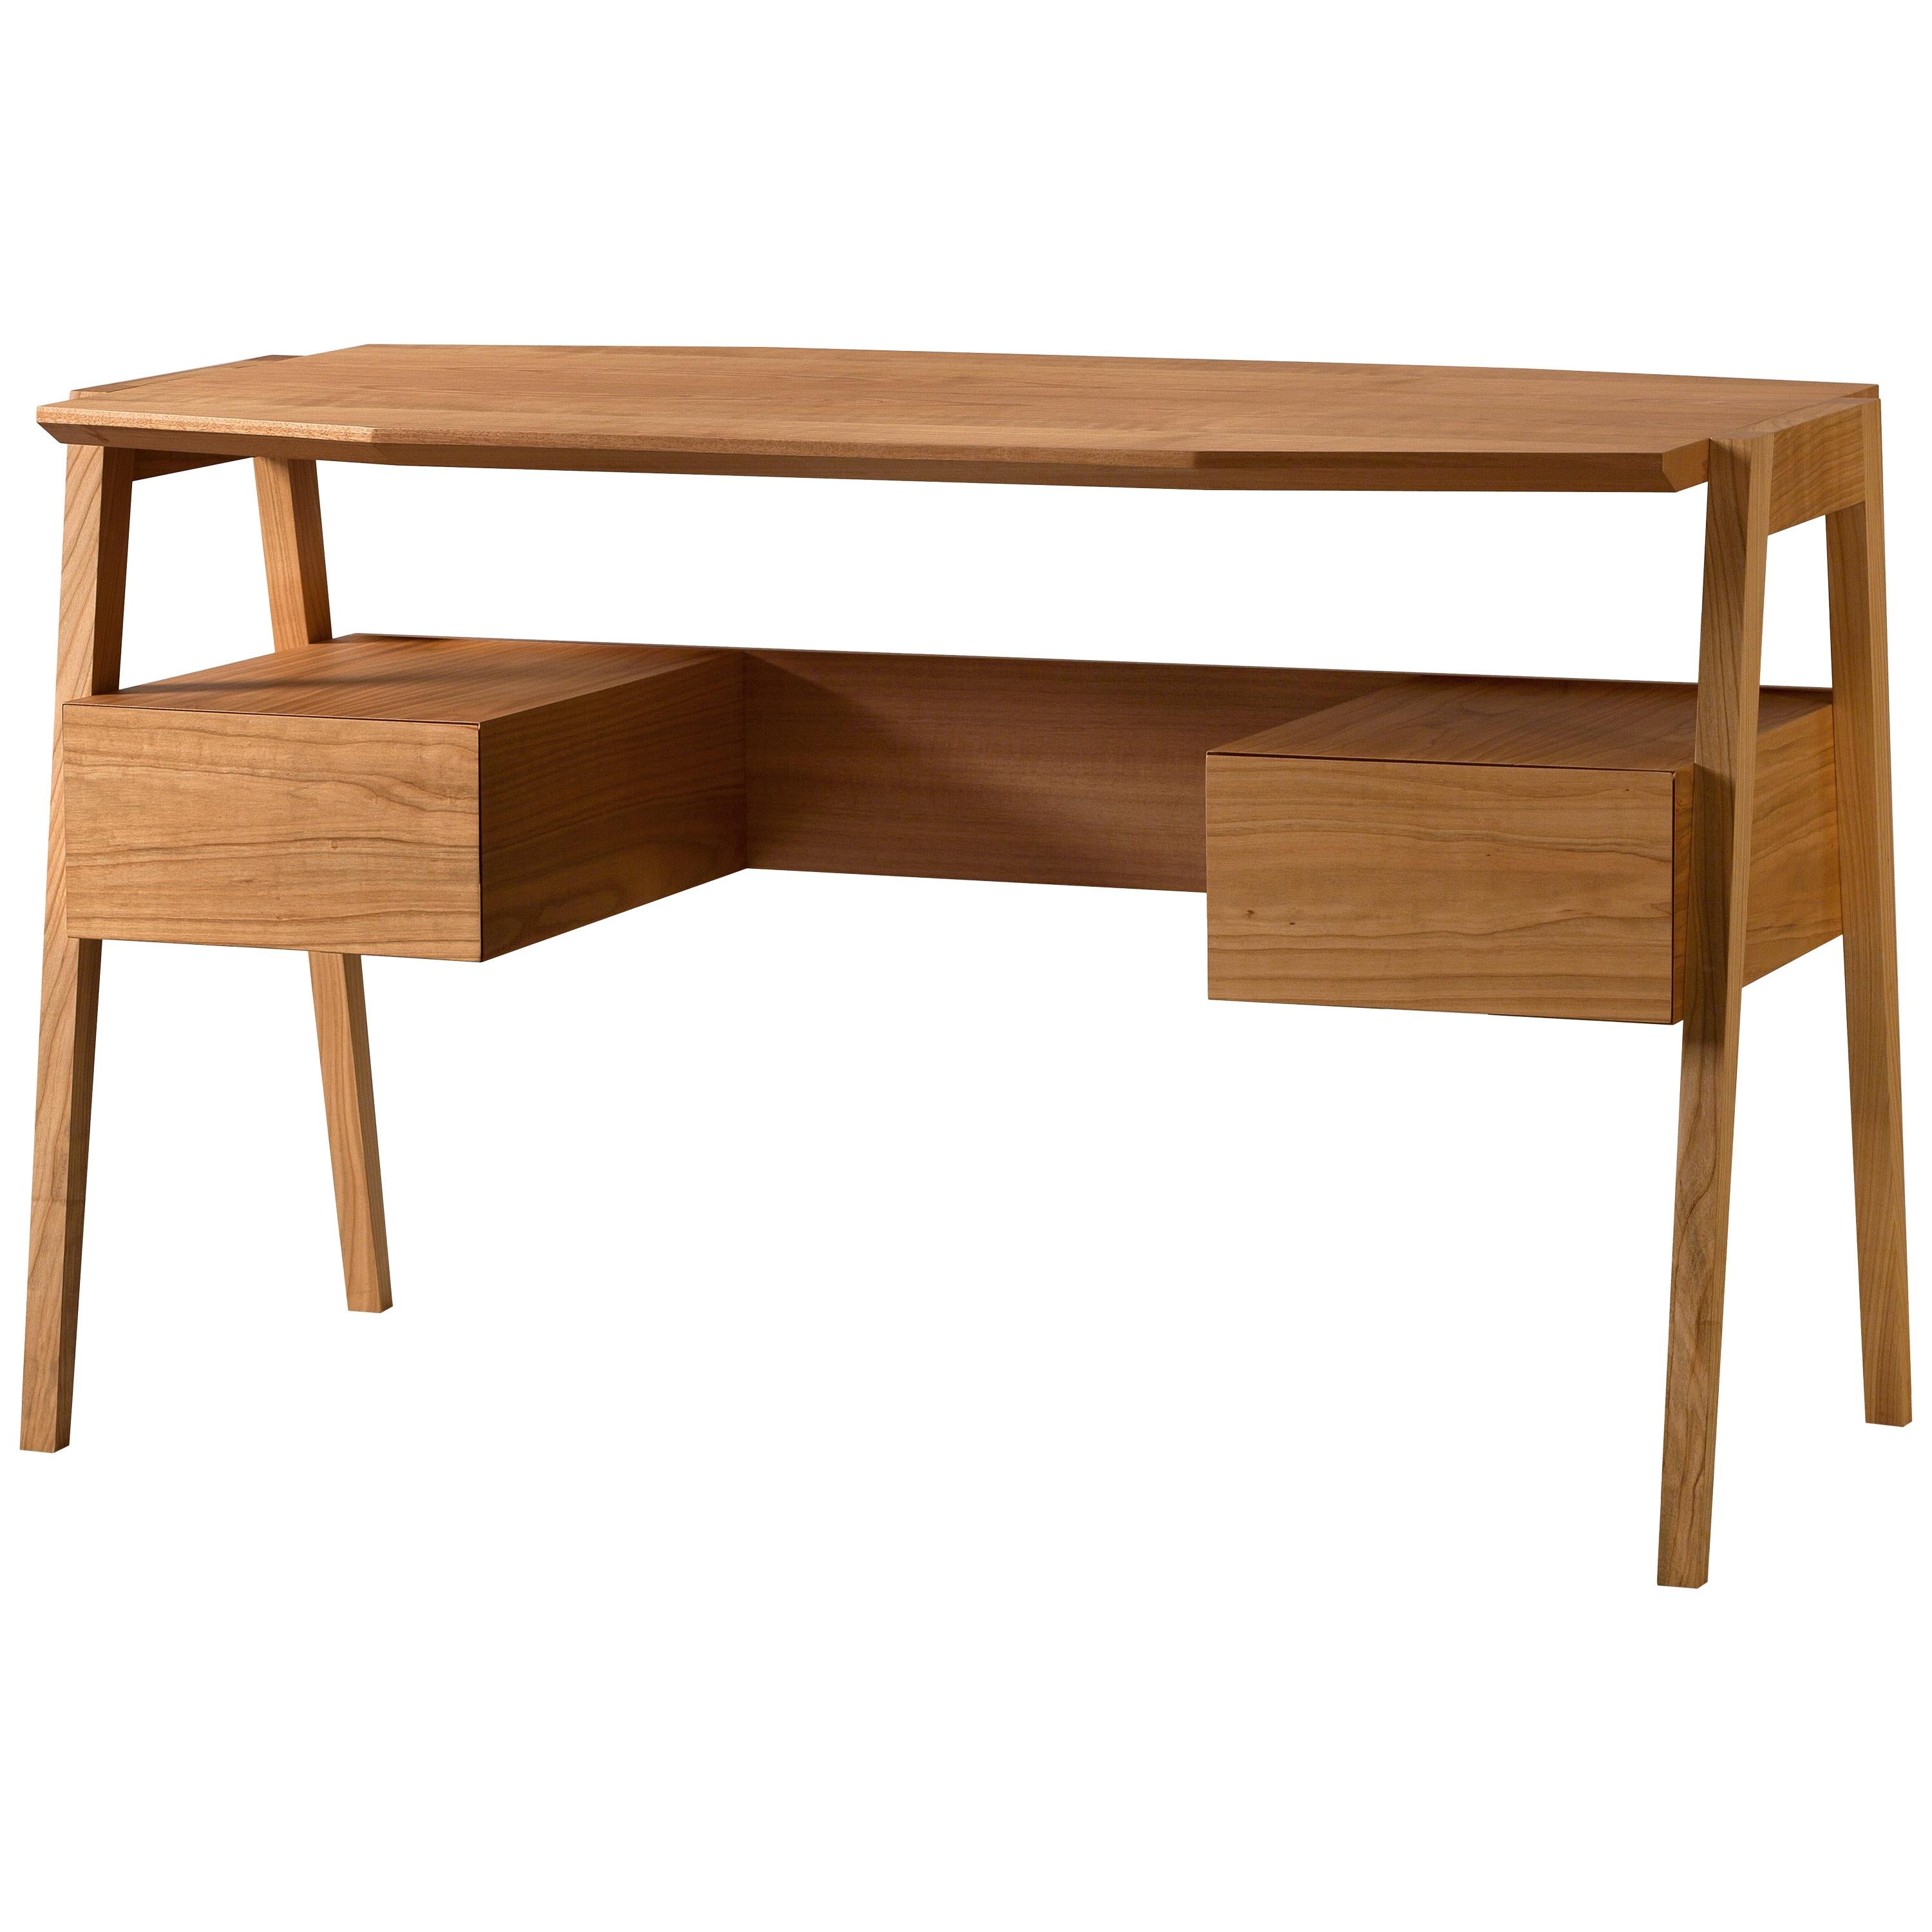 Midcentury Style Wooden Writing Desk with Drawers, by Morelato